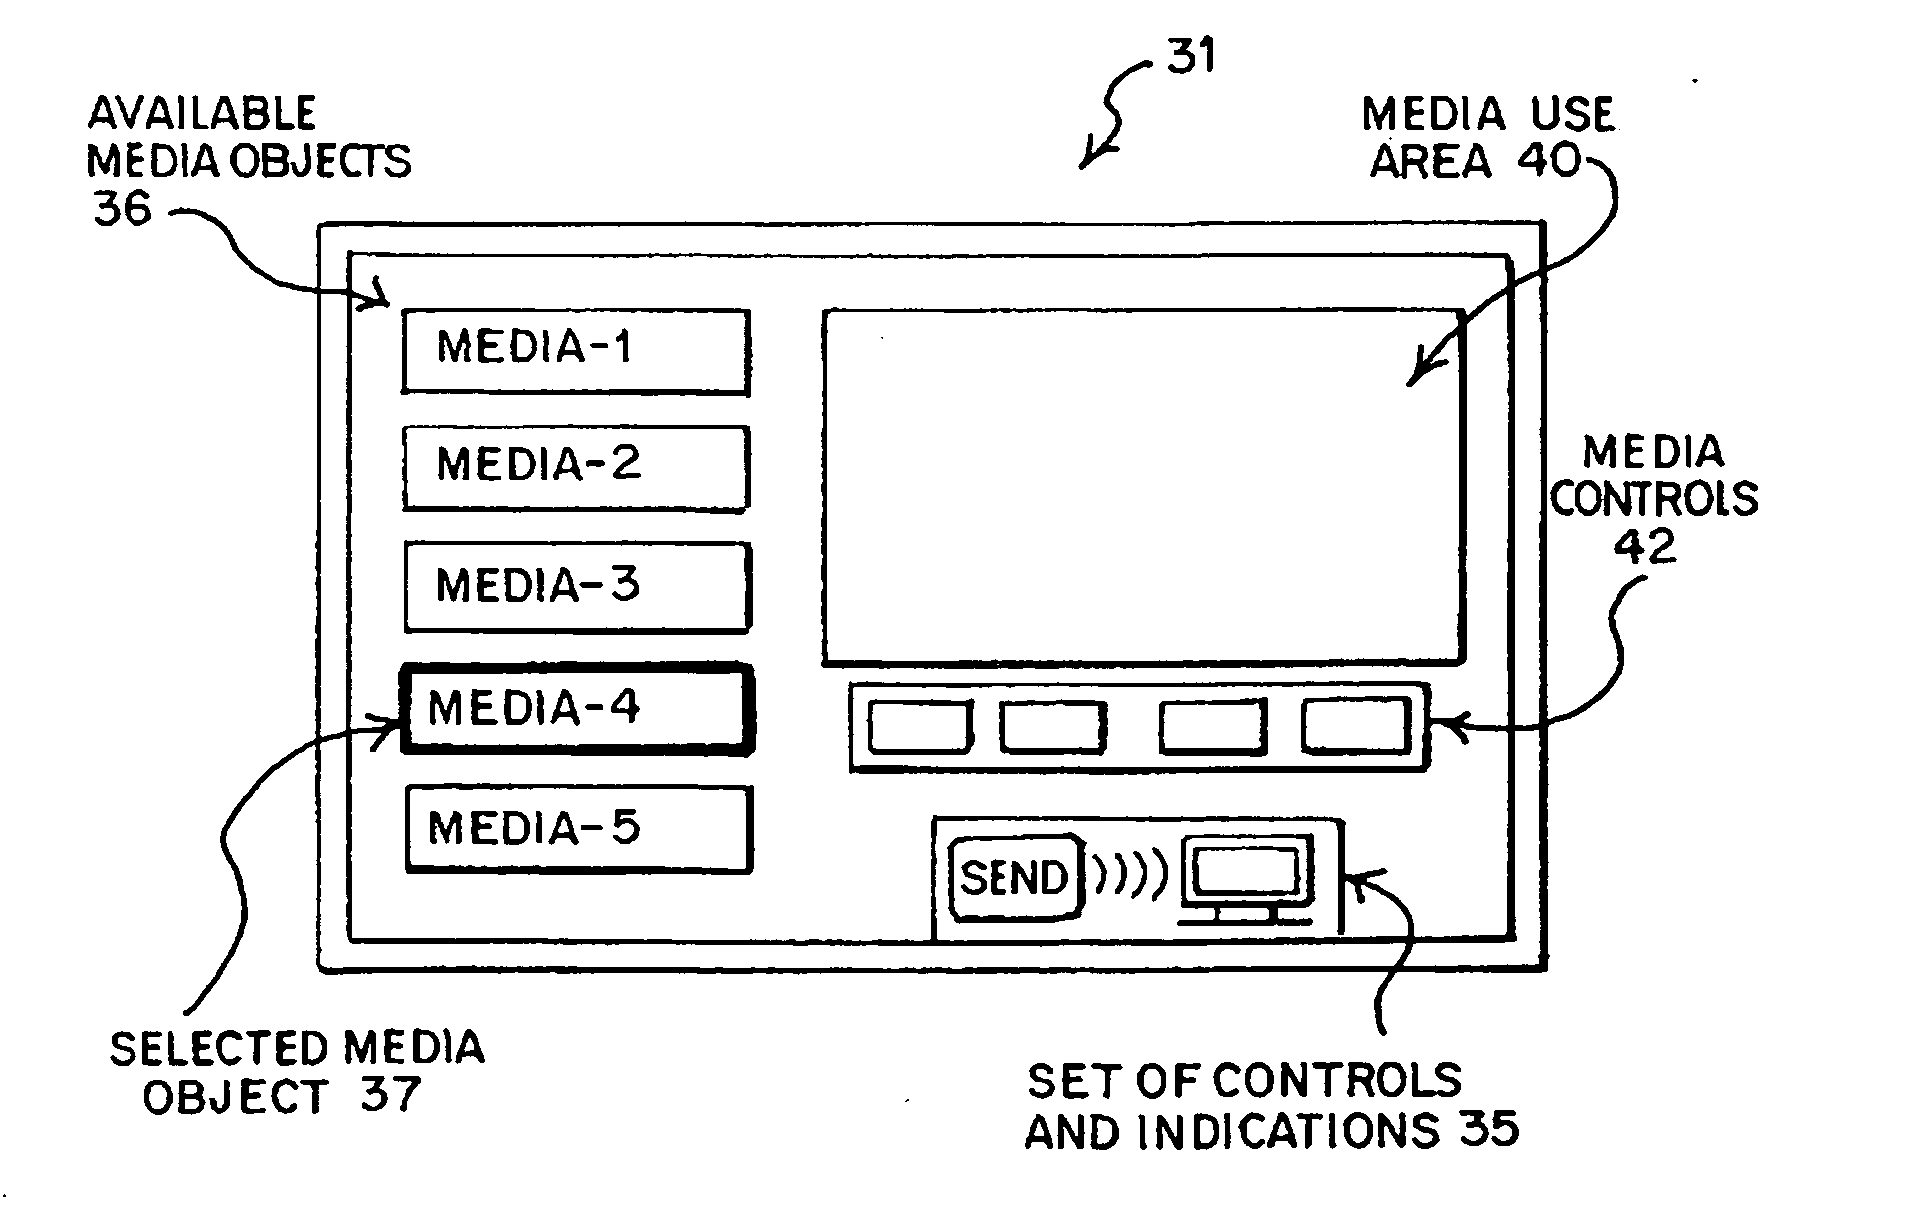 System and method for transferring media content from a mobile device to a home network